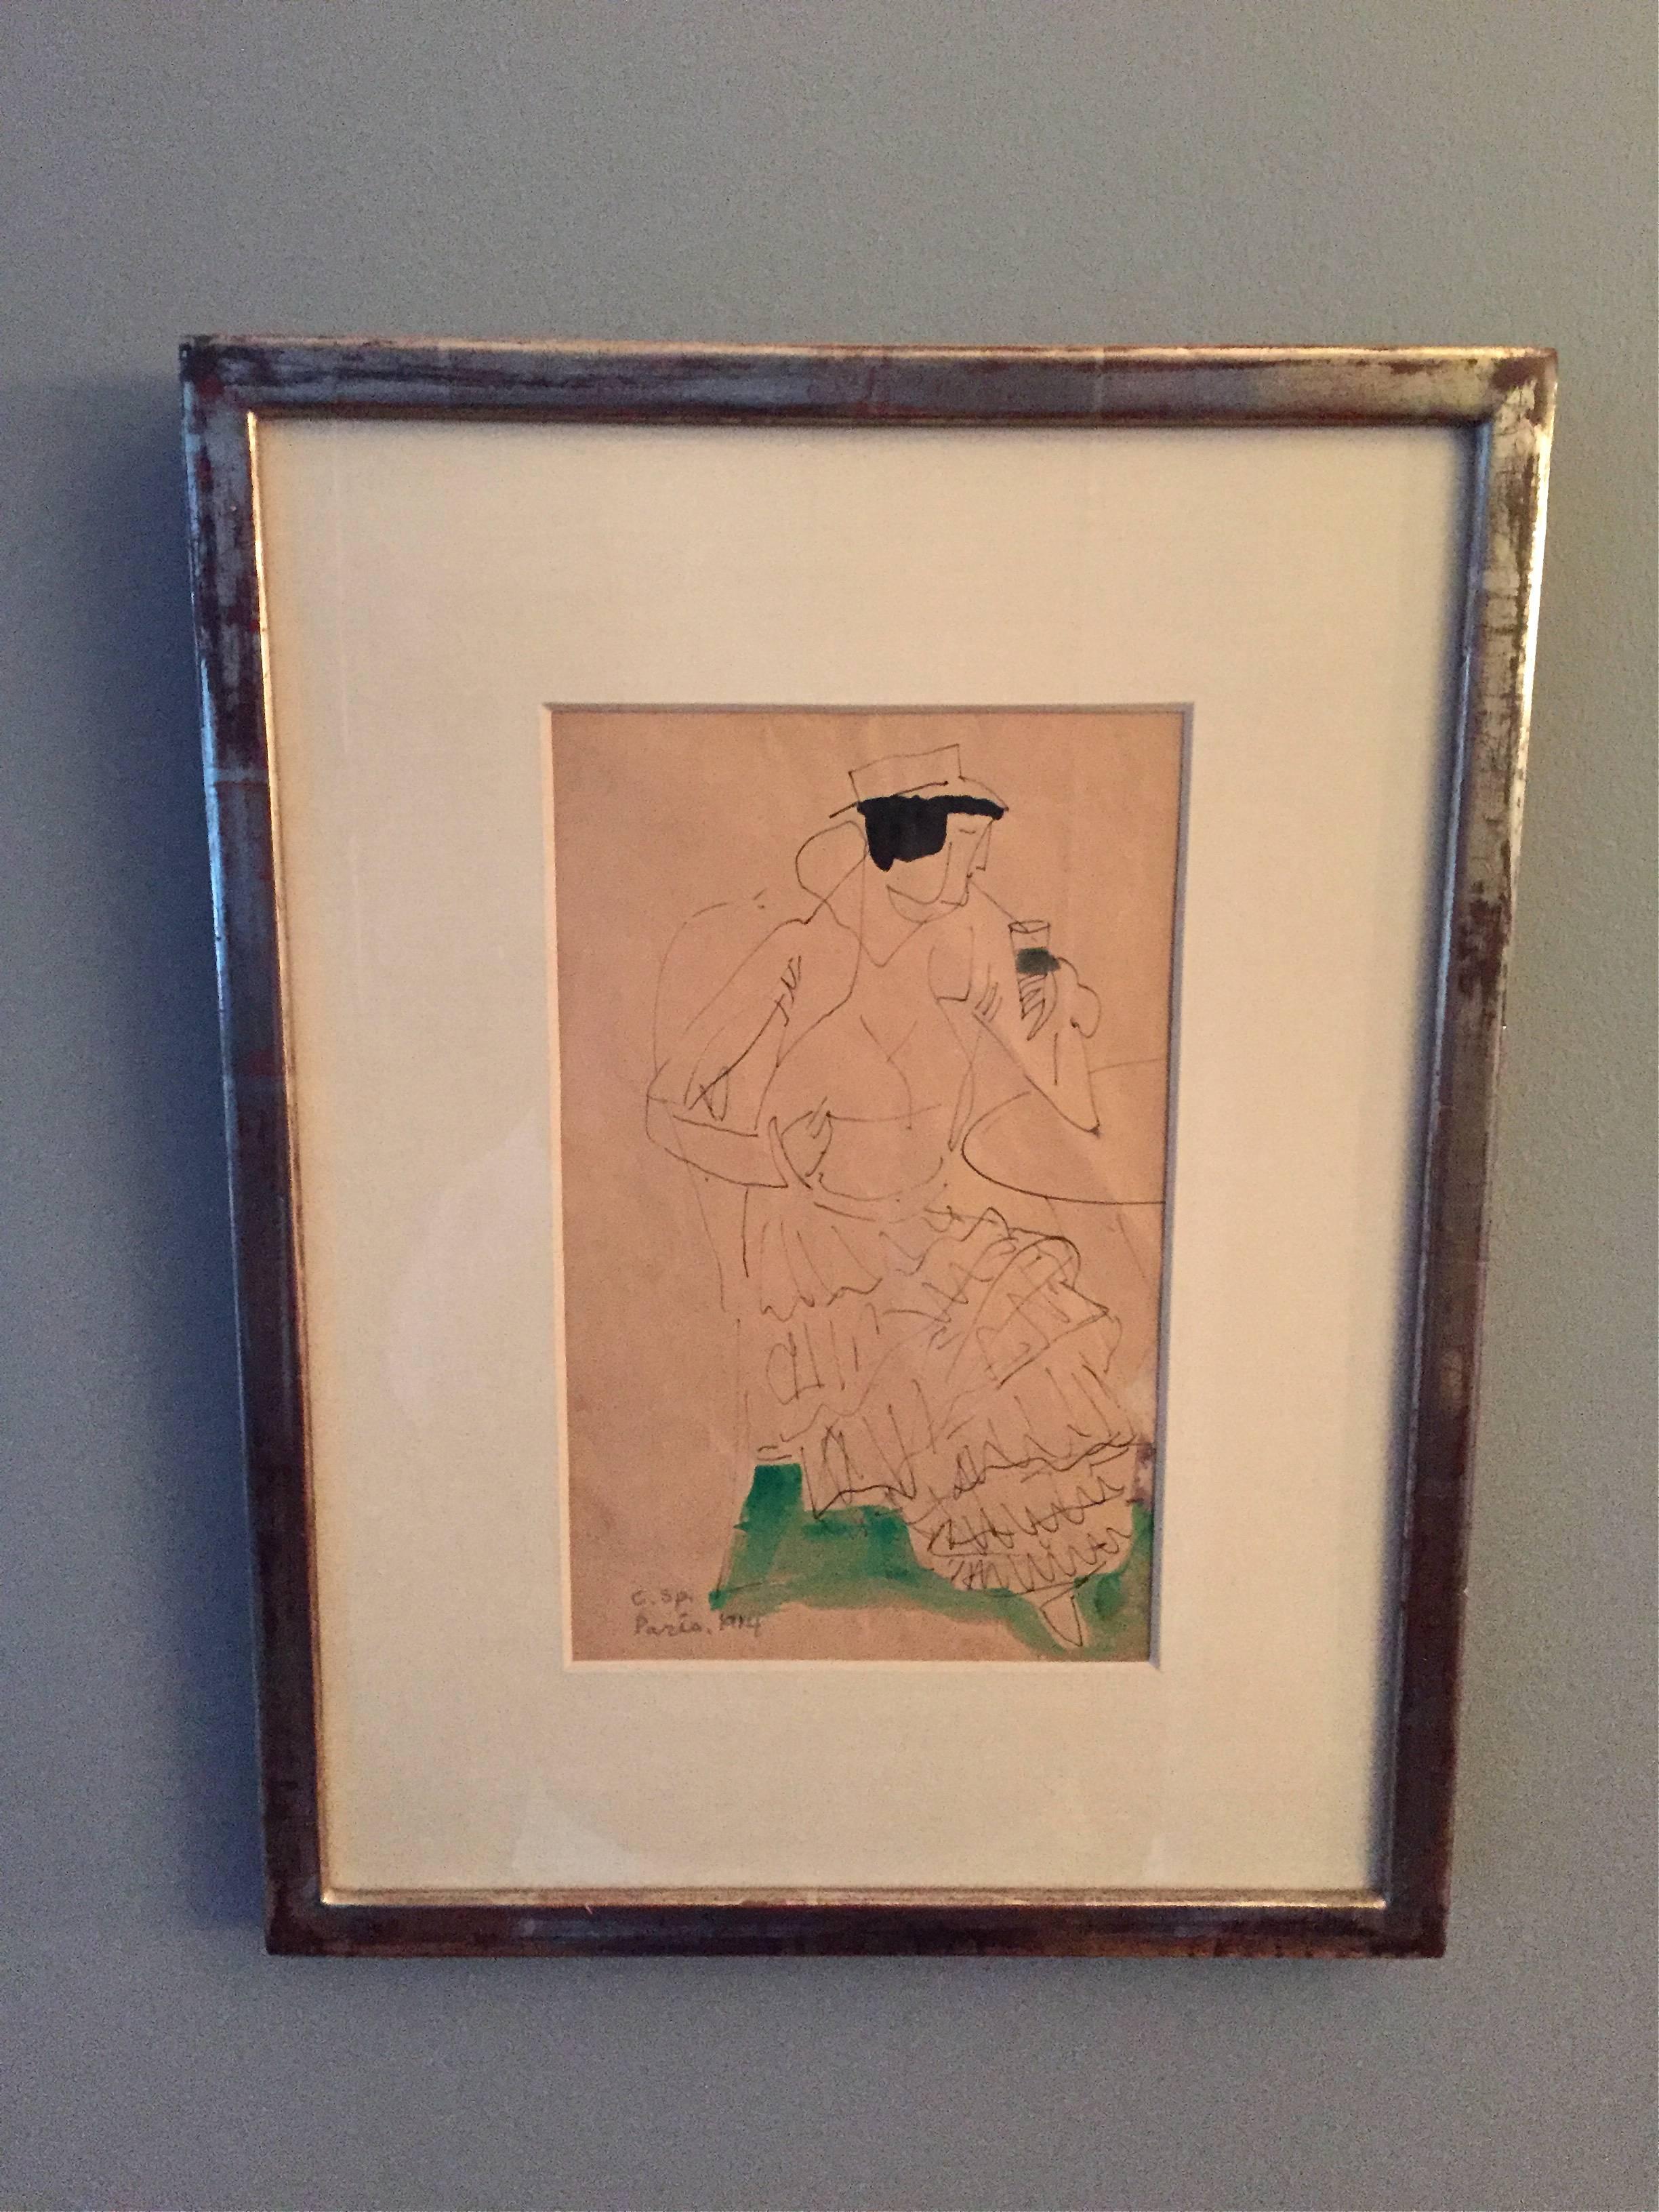 Ink and watercolor on paper by Carl Spinchorn (1887-1971). Very nicely framed and matted. Signed on the bottom left in pencil C. Sp. Paris, 1914.